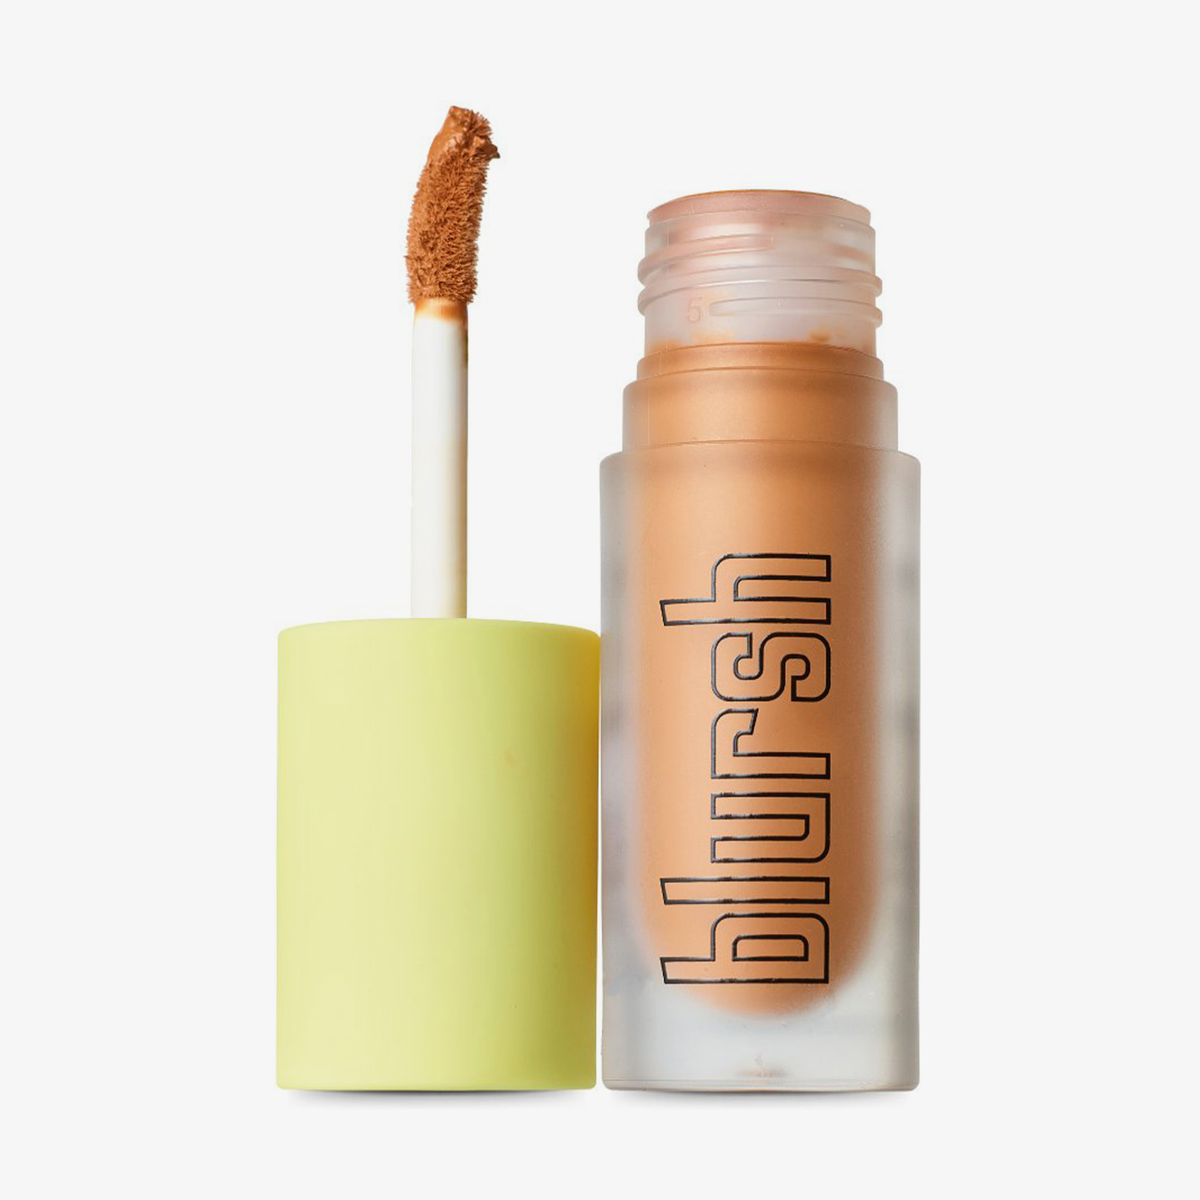 Made By Mitchell | Blursh Bronzed Creme Carve